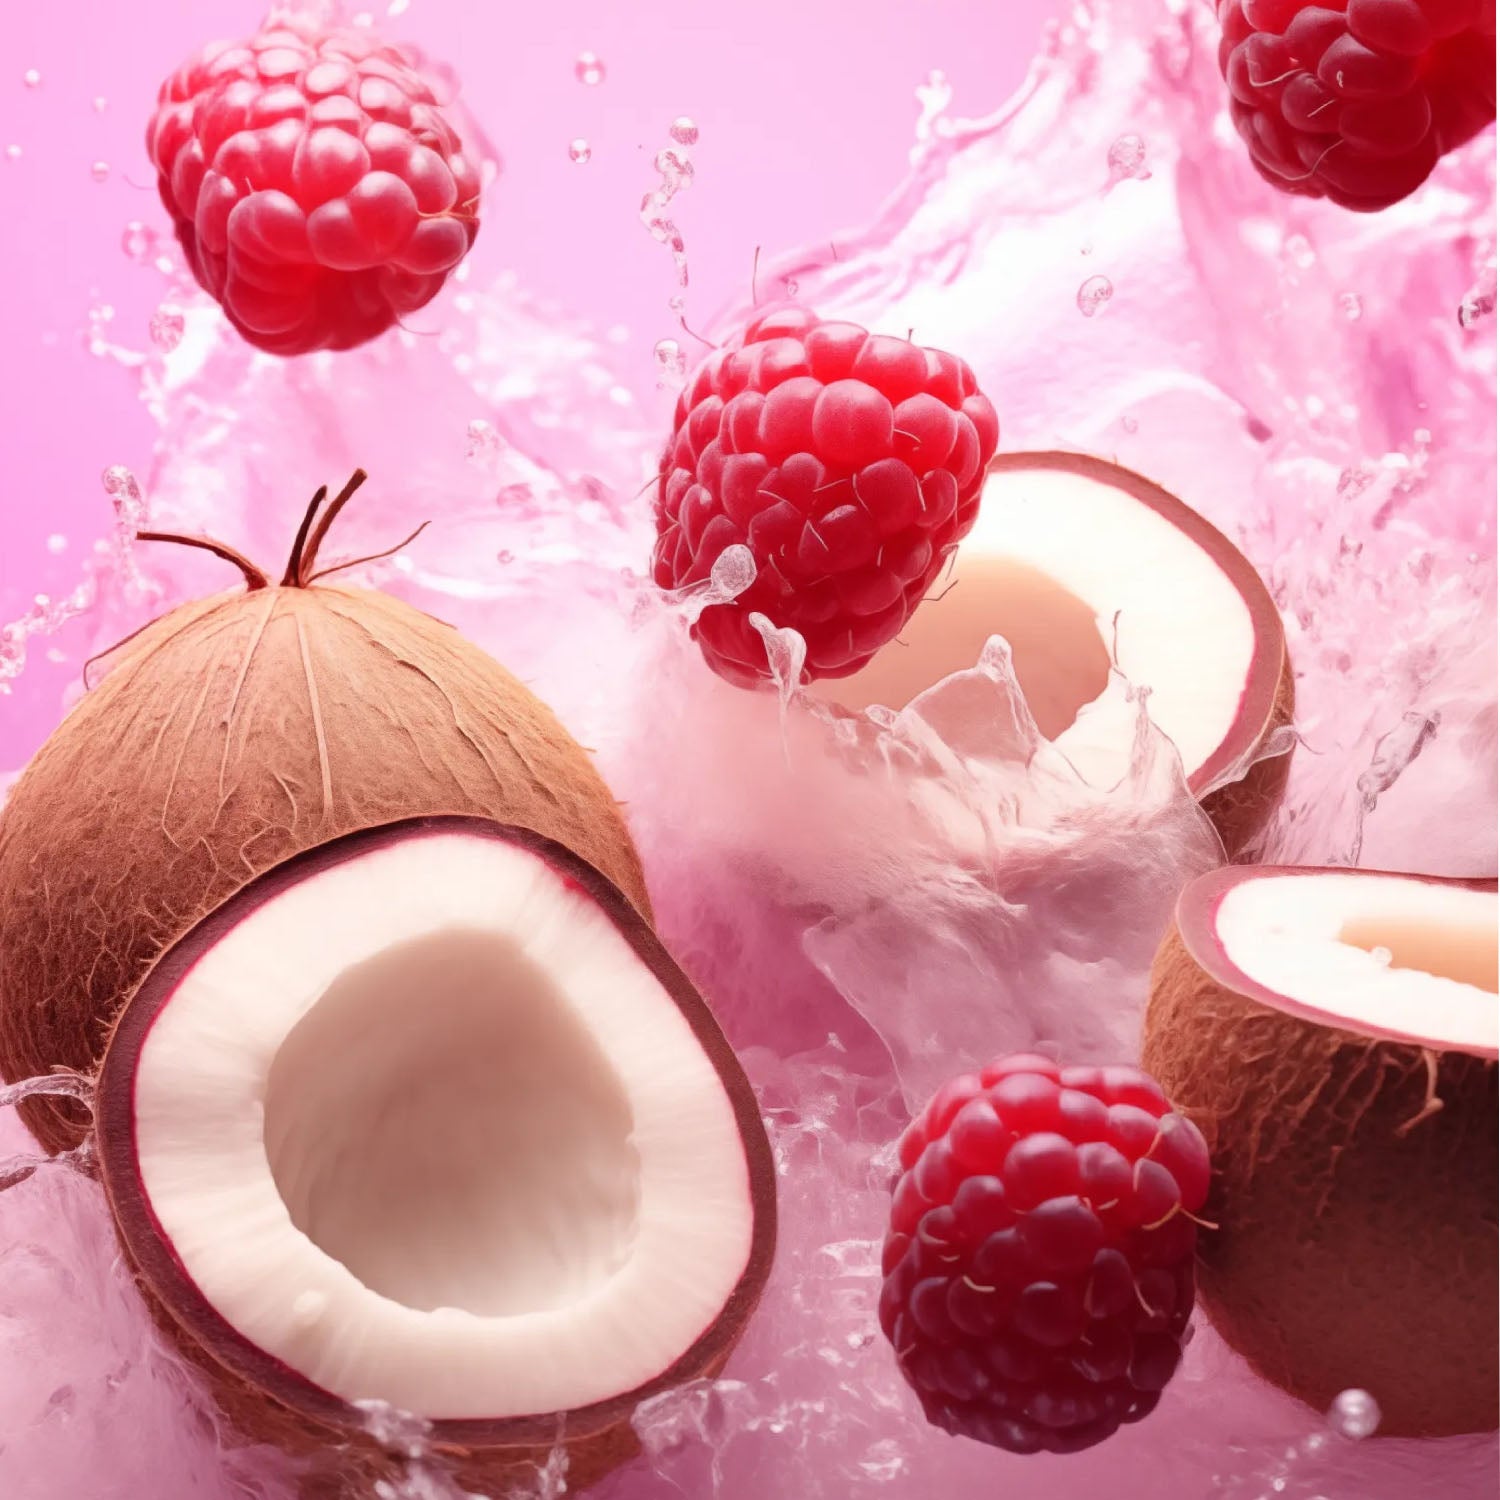 Delicious coconuts and raspberries